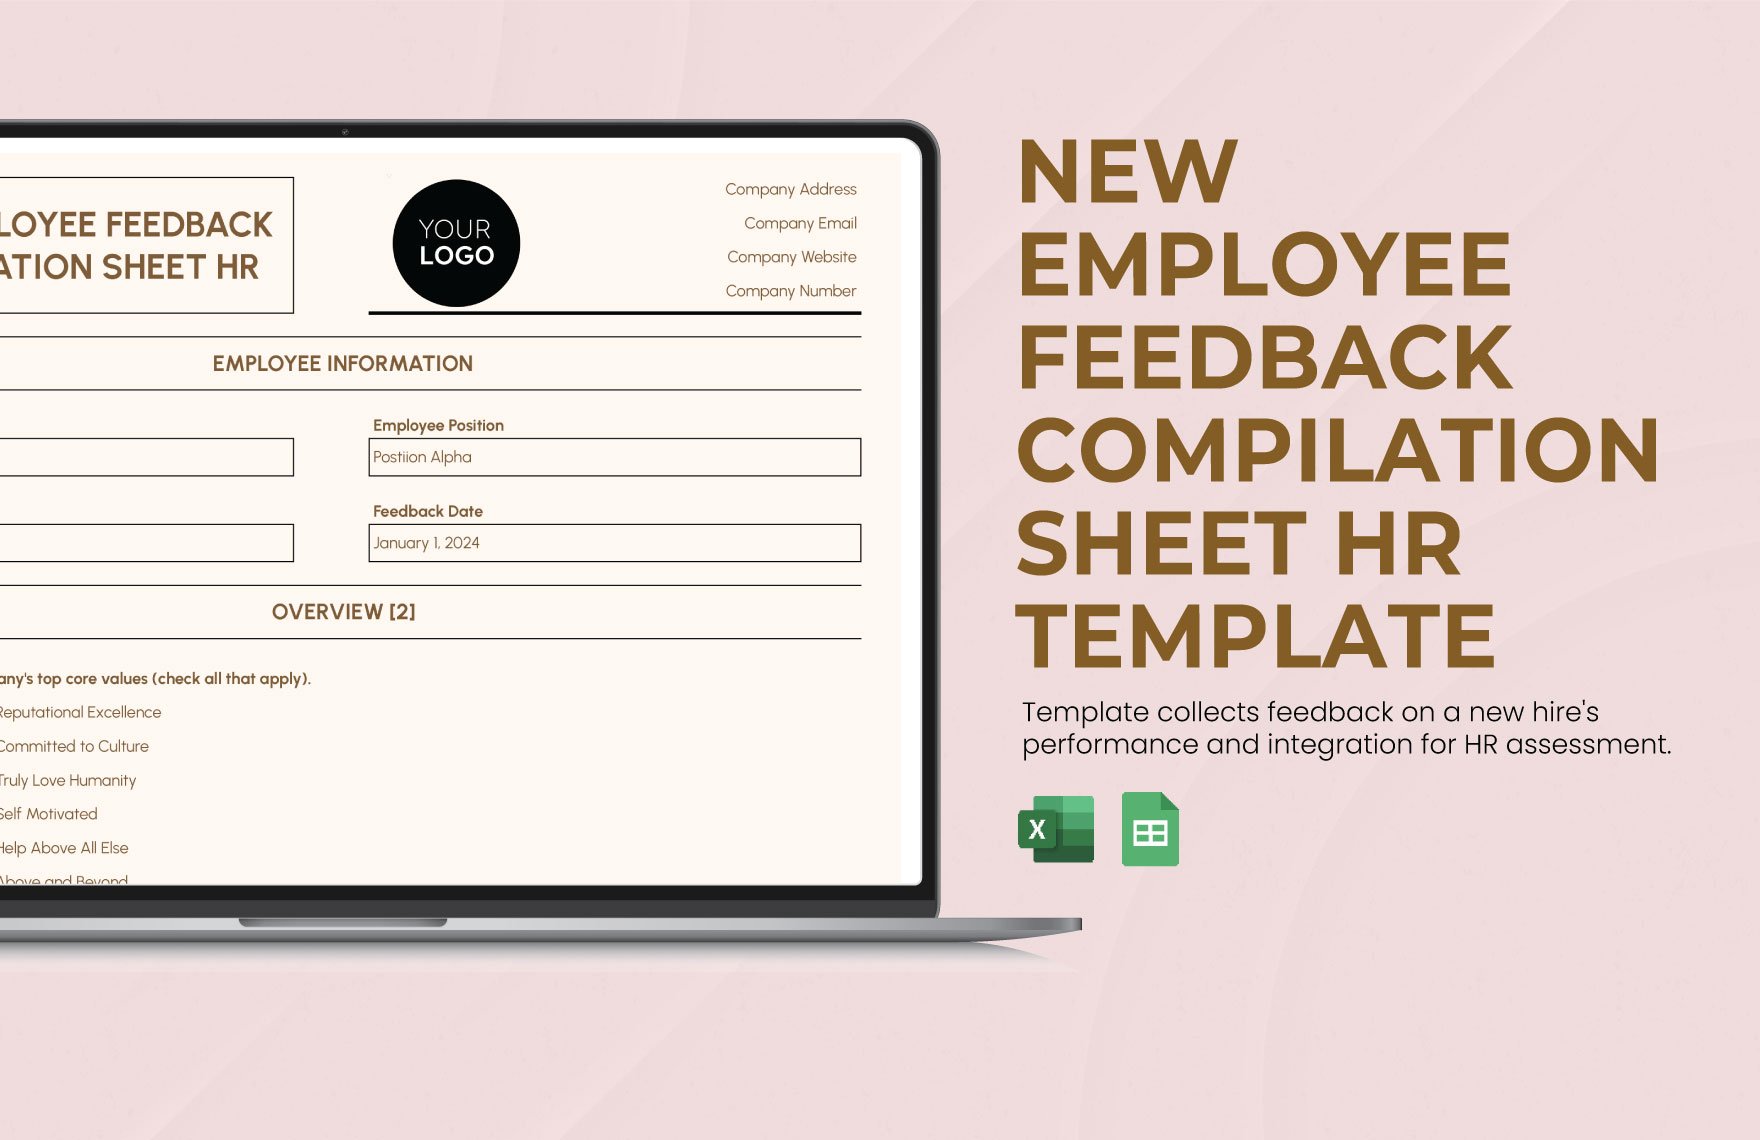 New Employee Feedback Compilation Sheet HR Template in Excel, Google Sheets